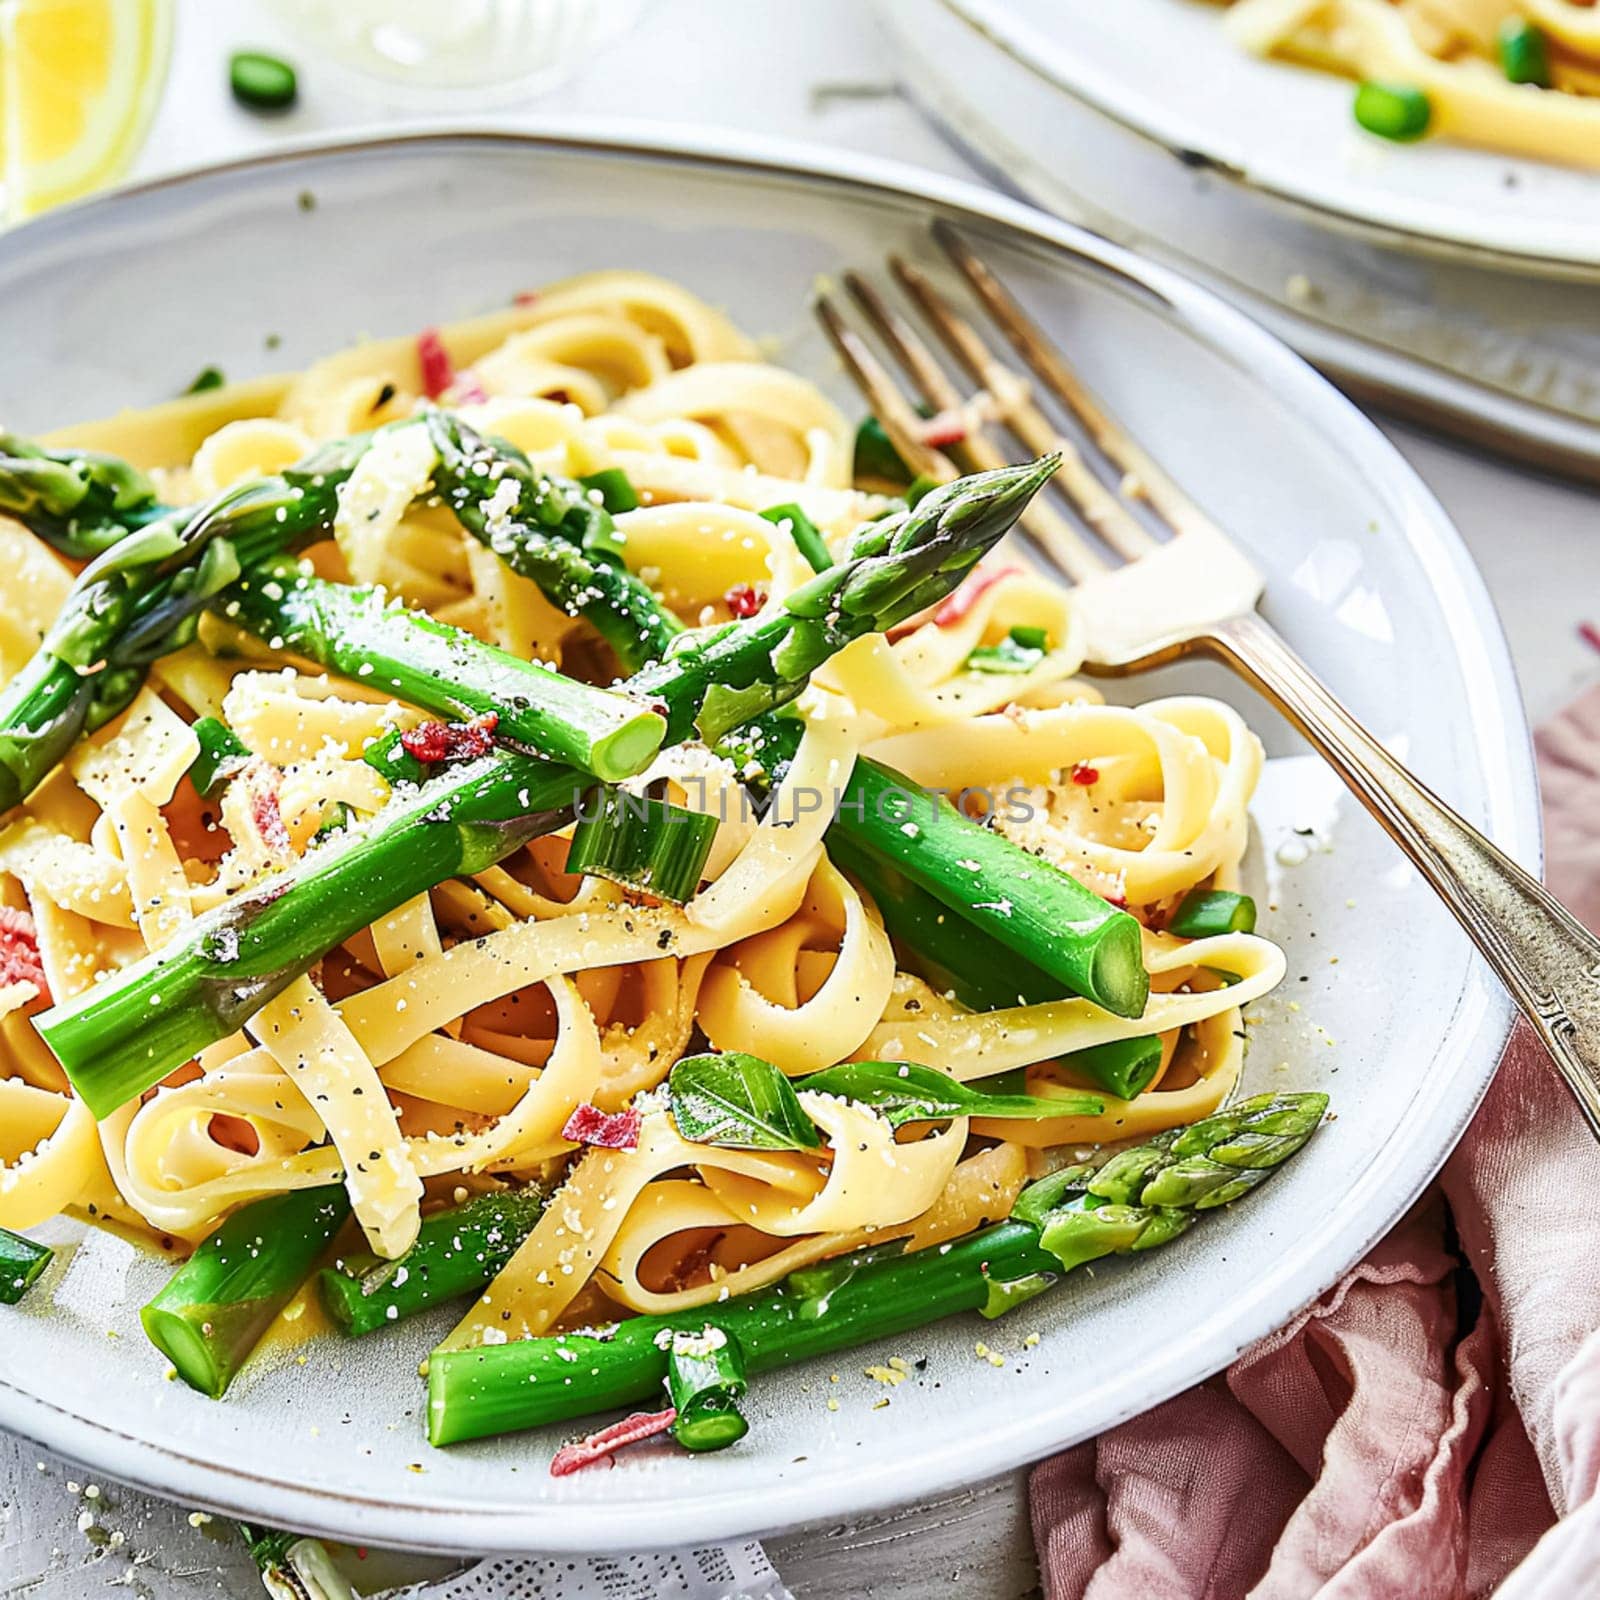 Pasta with asparagus, bacon and parmesan cheese by Anneleven